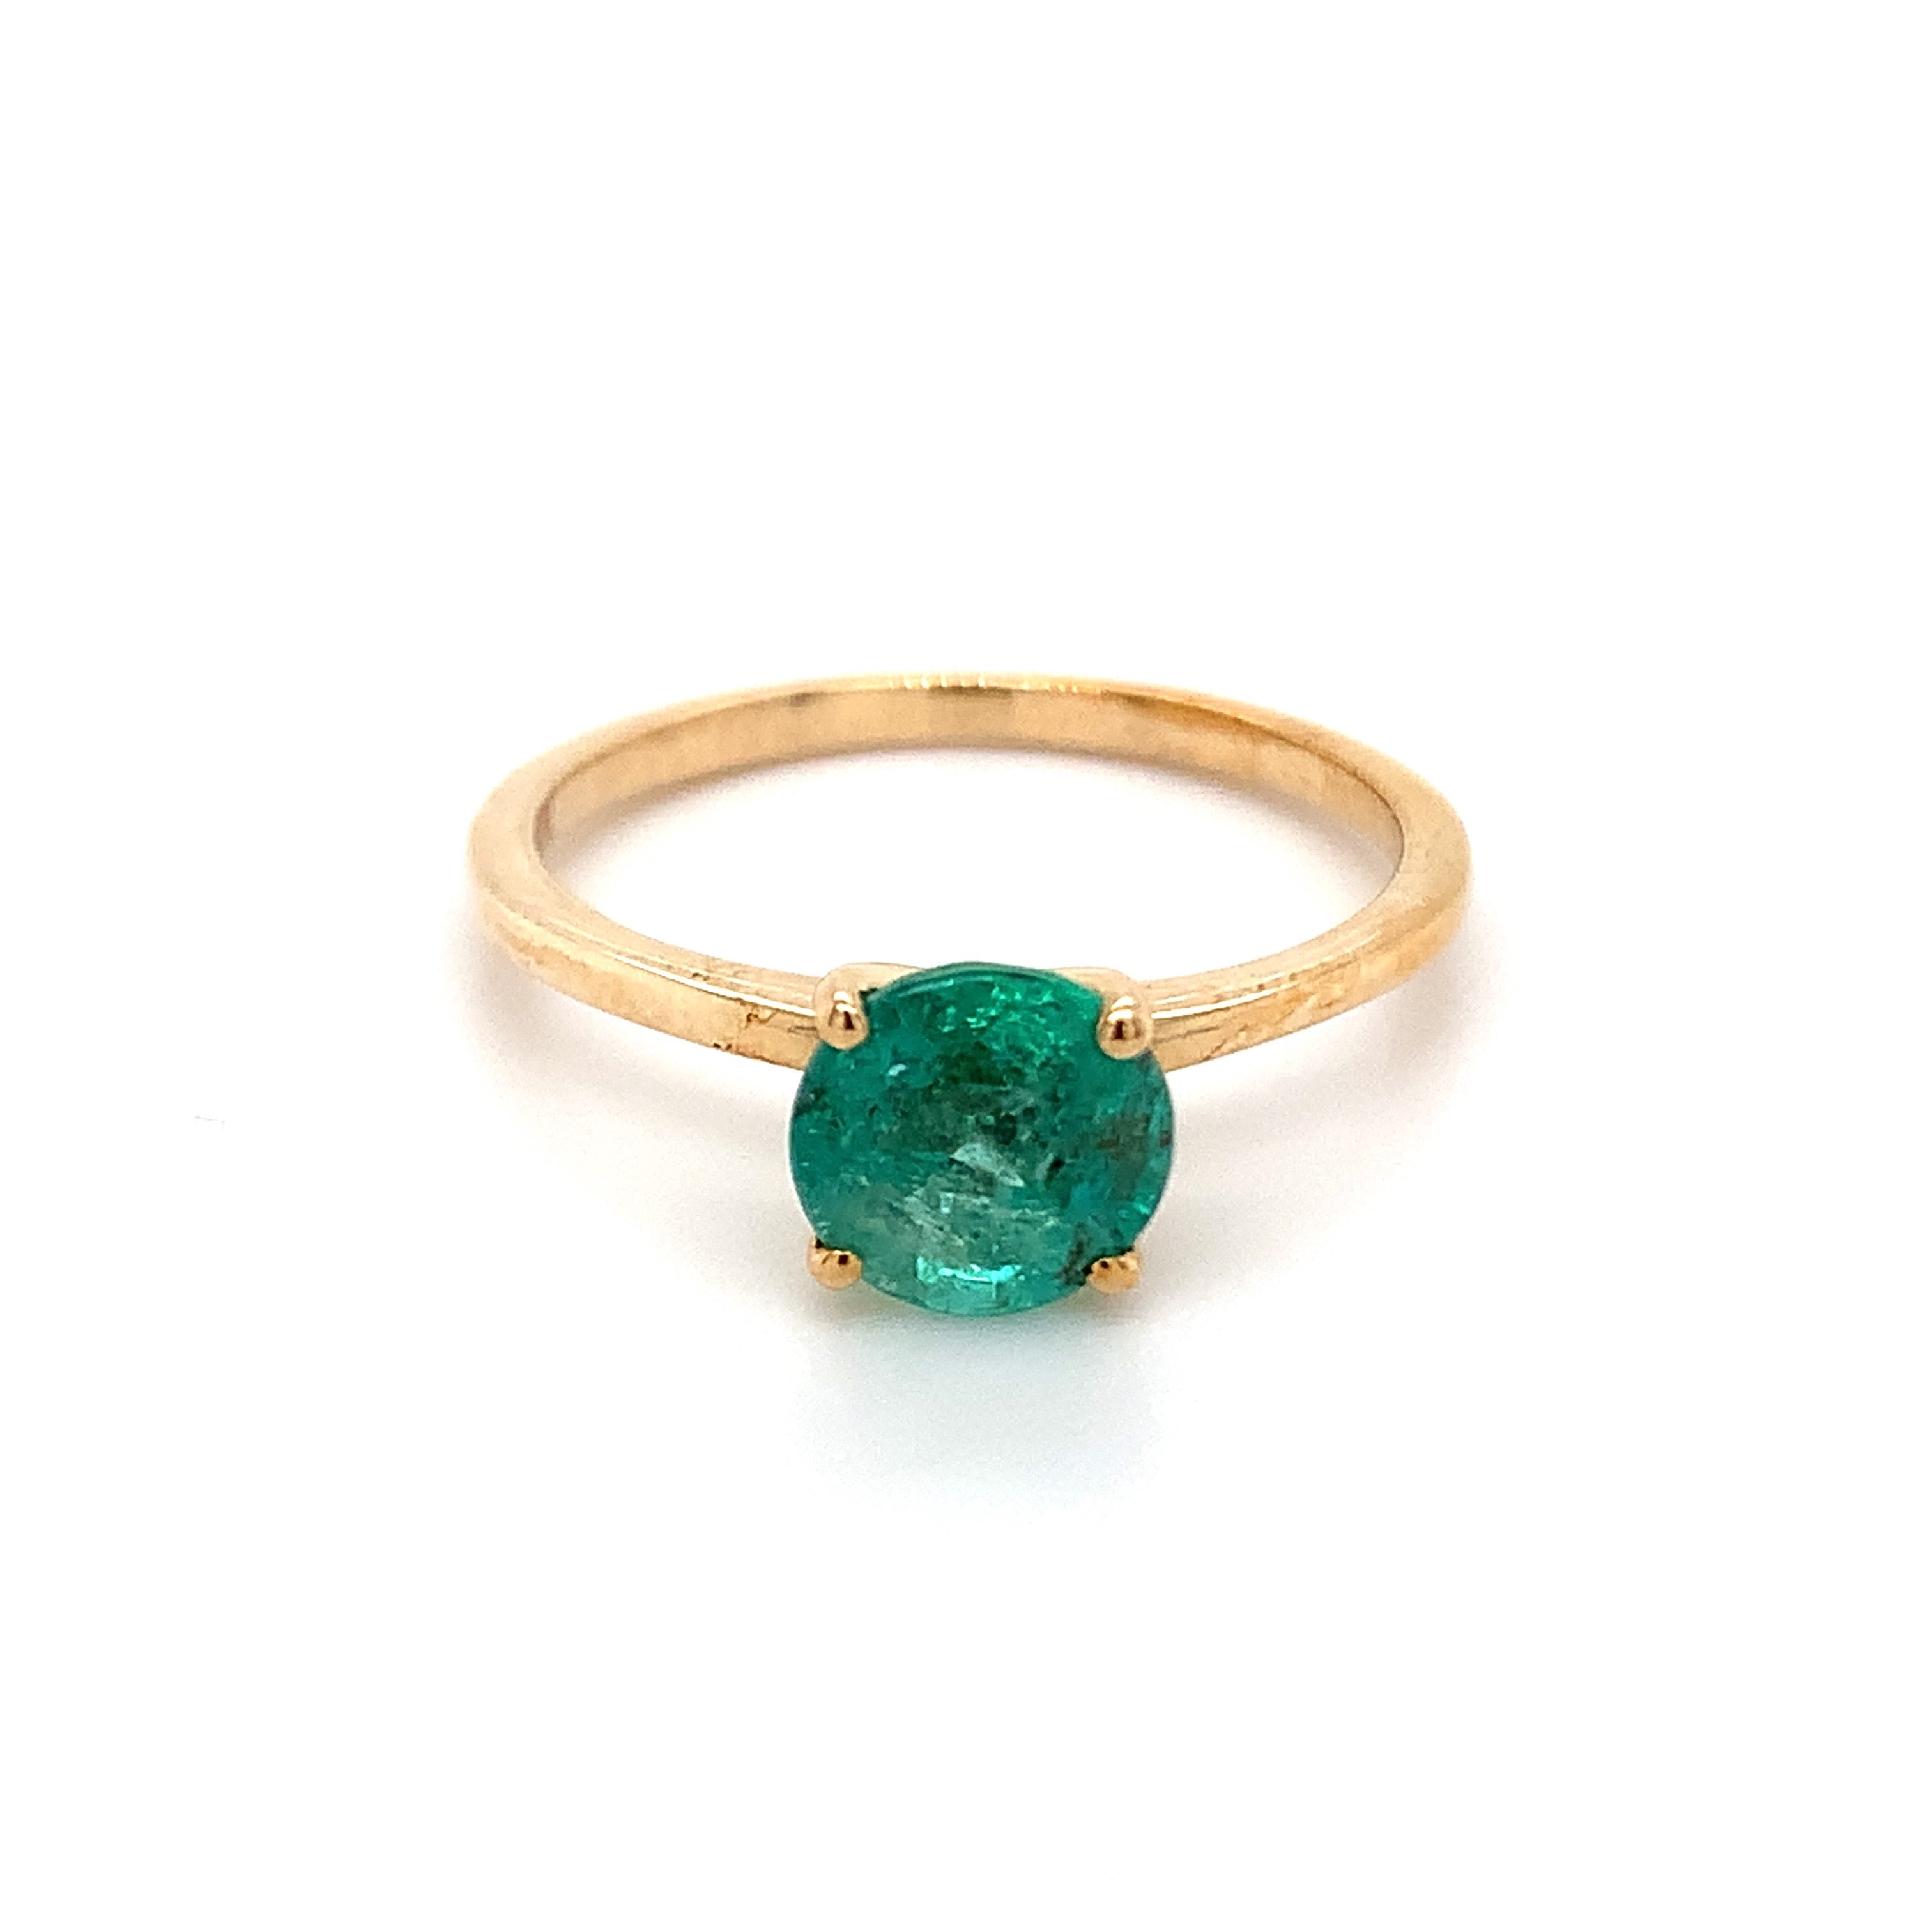 1.25 Carat Round Emerald Ring in 10k Yellow Gold